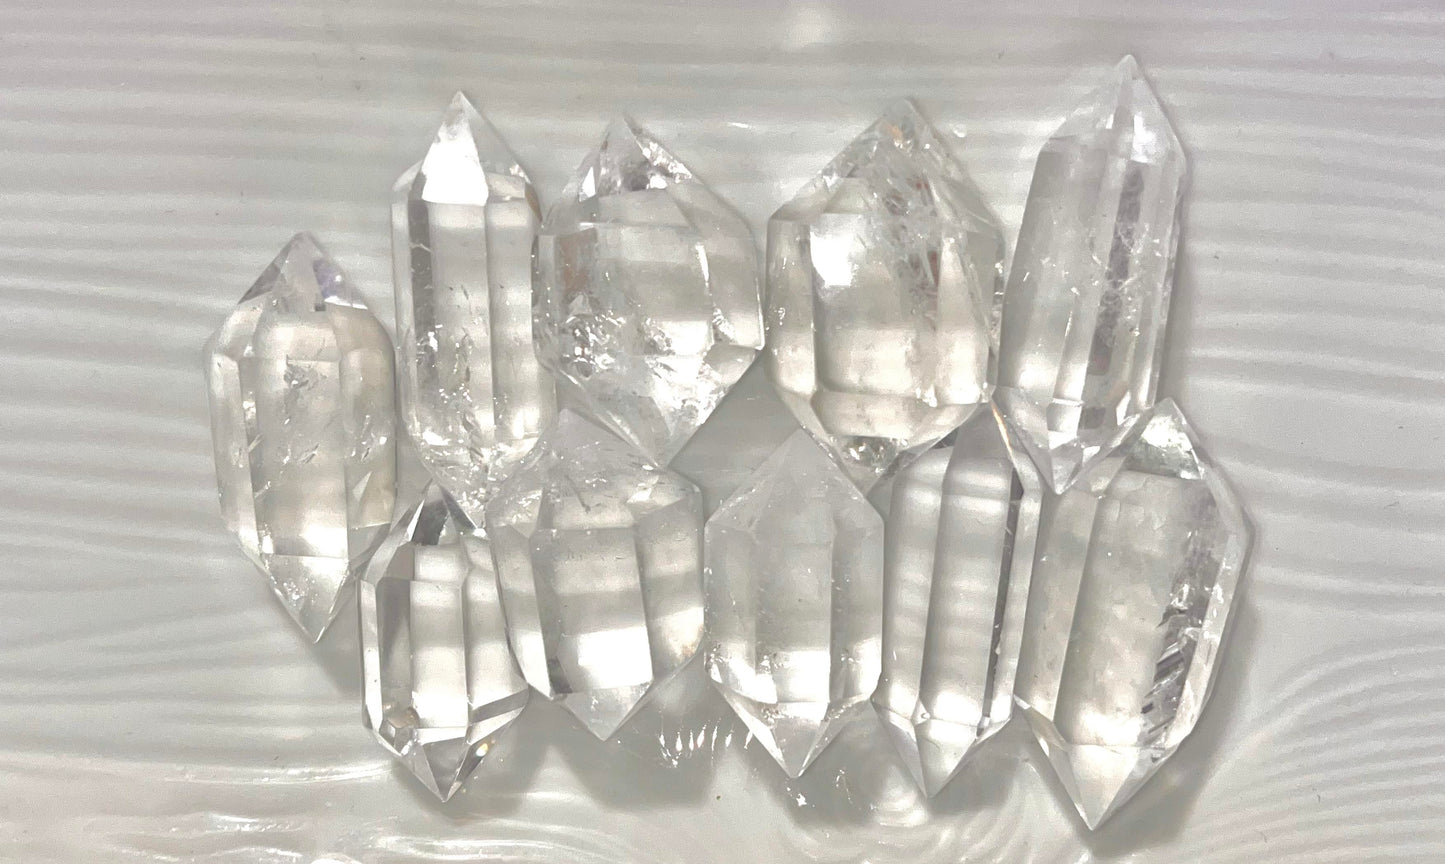 Super high quality Authentic natural Clear quartz Vogel crystal wand Double Terminated Point, 6 sided Healing crystal Chakra healer